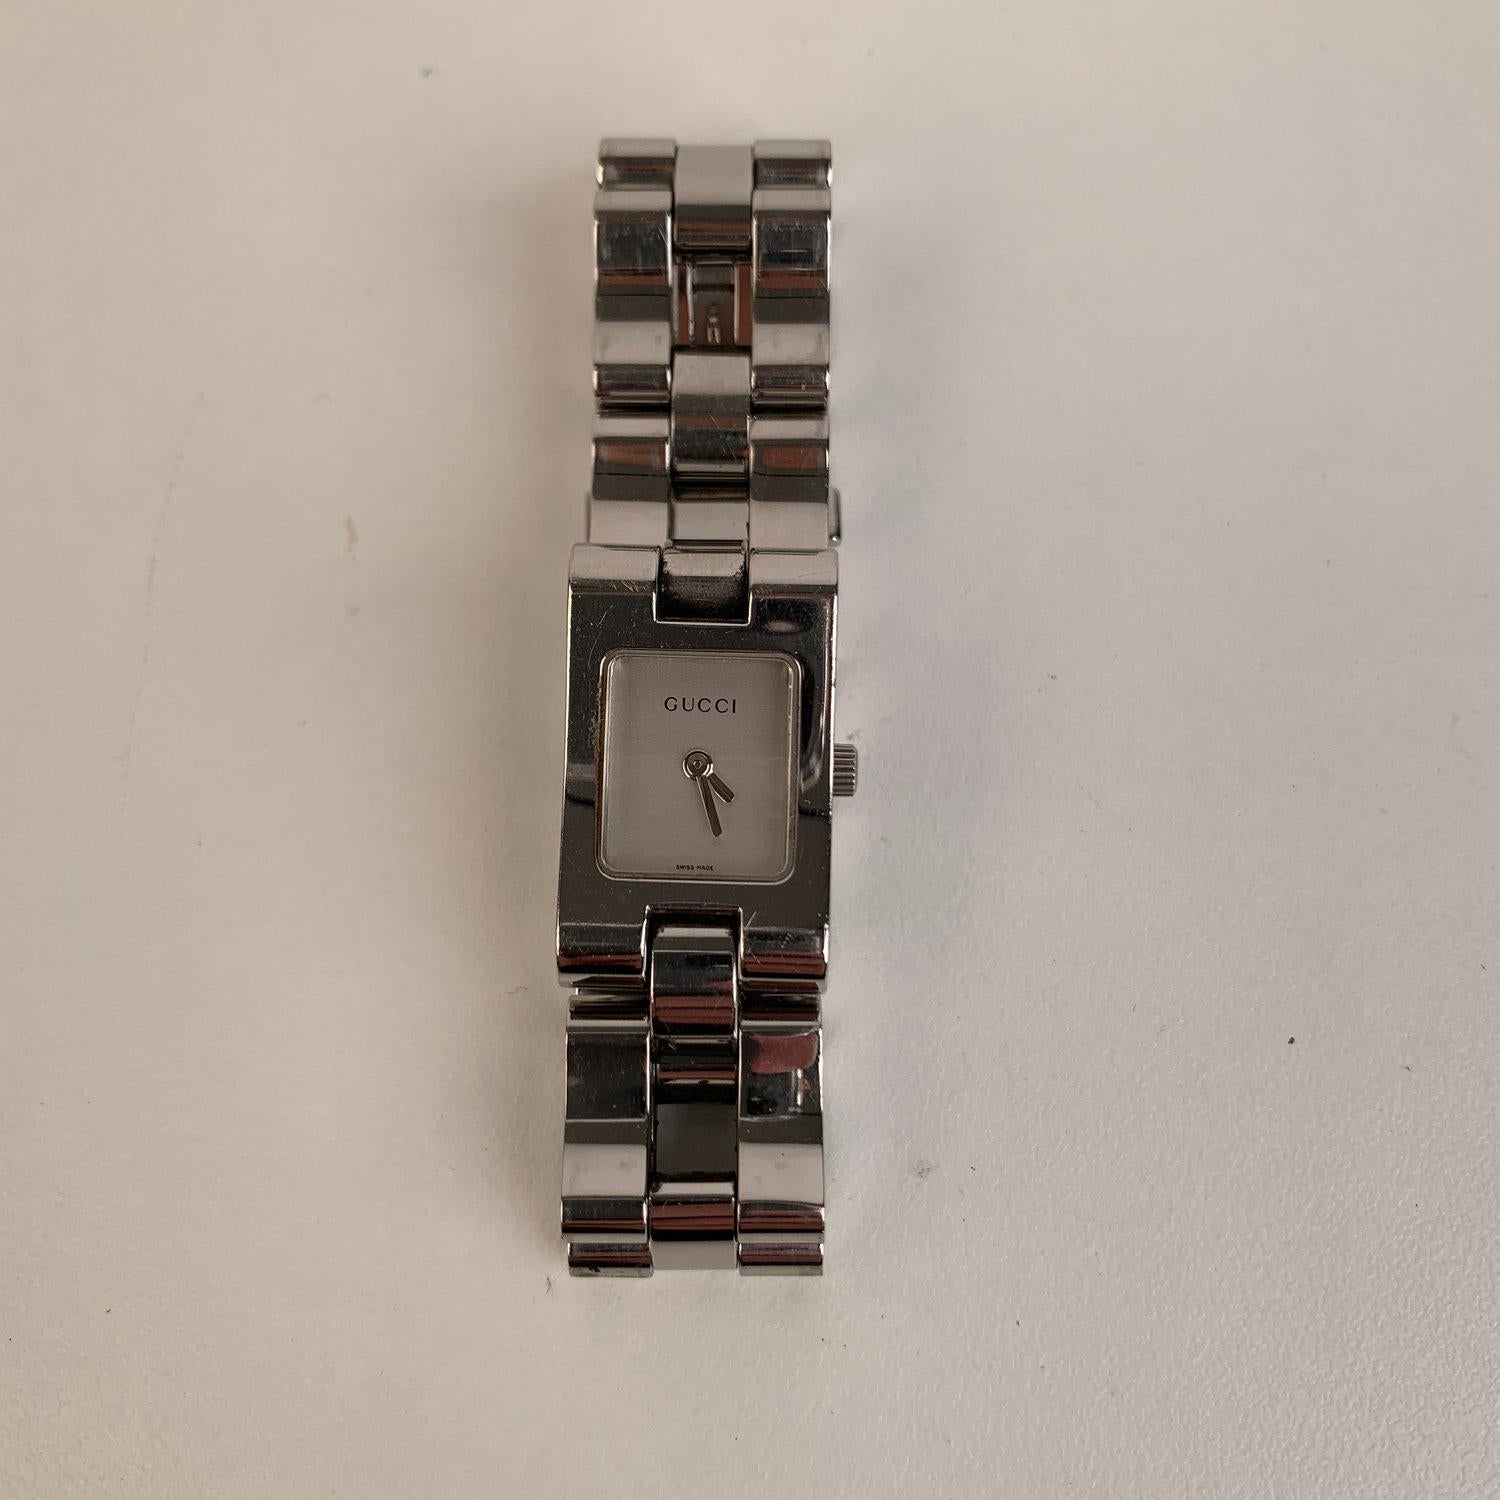 Description
Gucci 2305L stainless steel wrist watch. Stainless steel case (Approximately 28 mm x 17 mm). White Dial and Sapphire crystal. Swiss Made Quartz movement. Gucci written on face, clasp & reverse.Water Resistant to 3atm. Deployant Clasp.